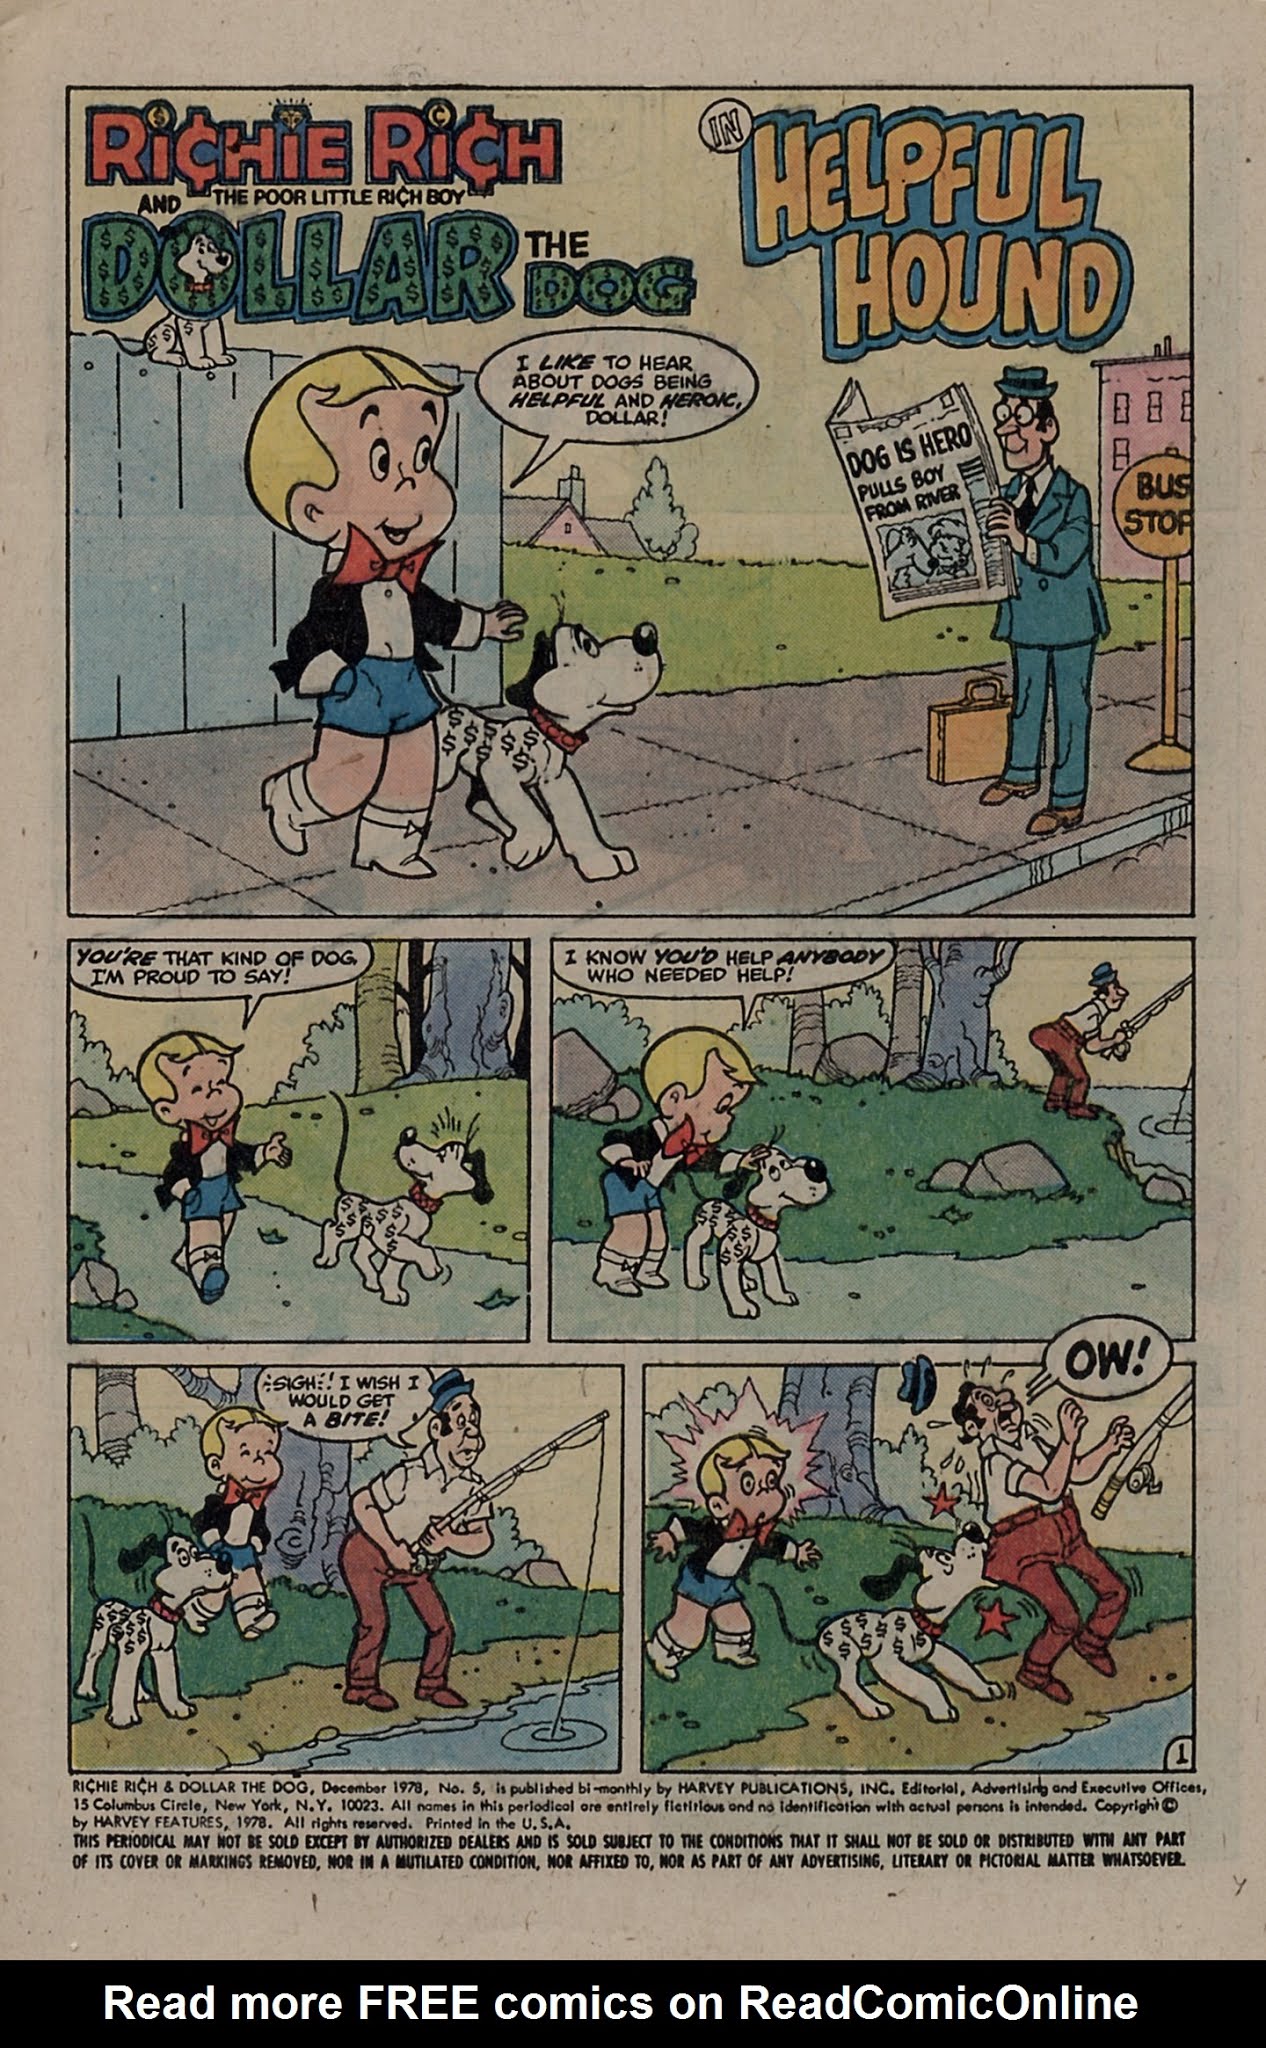 Read online Richie Rich & Dollar the Dog comic -  Issue #5 - 5